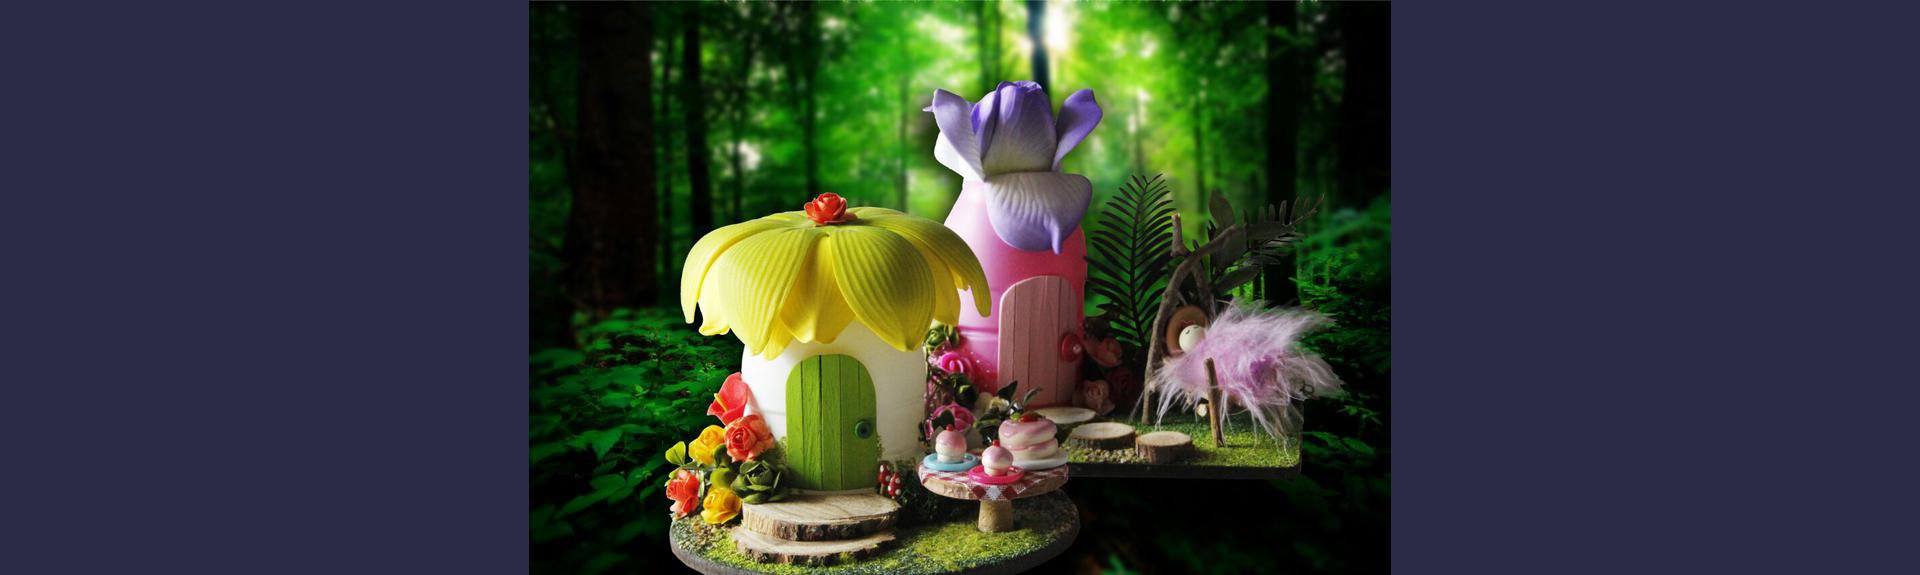 Make it Magical fairy house building workshops 